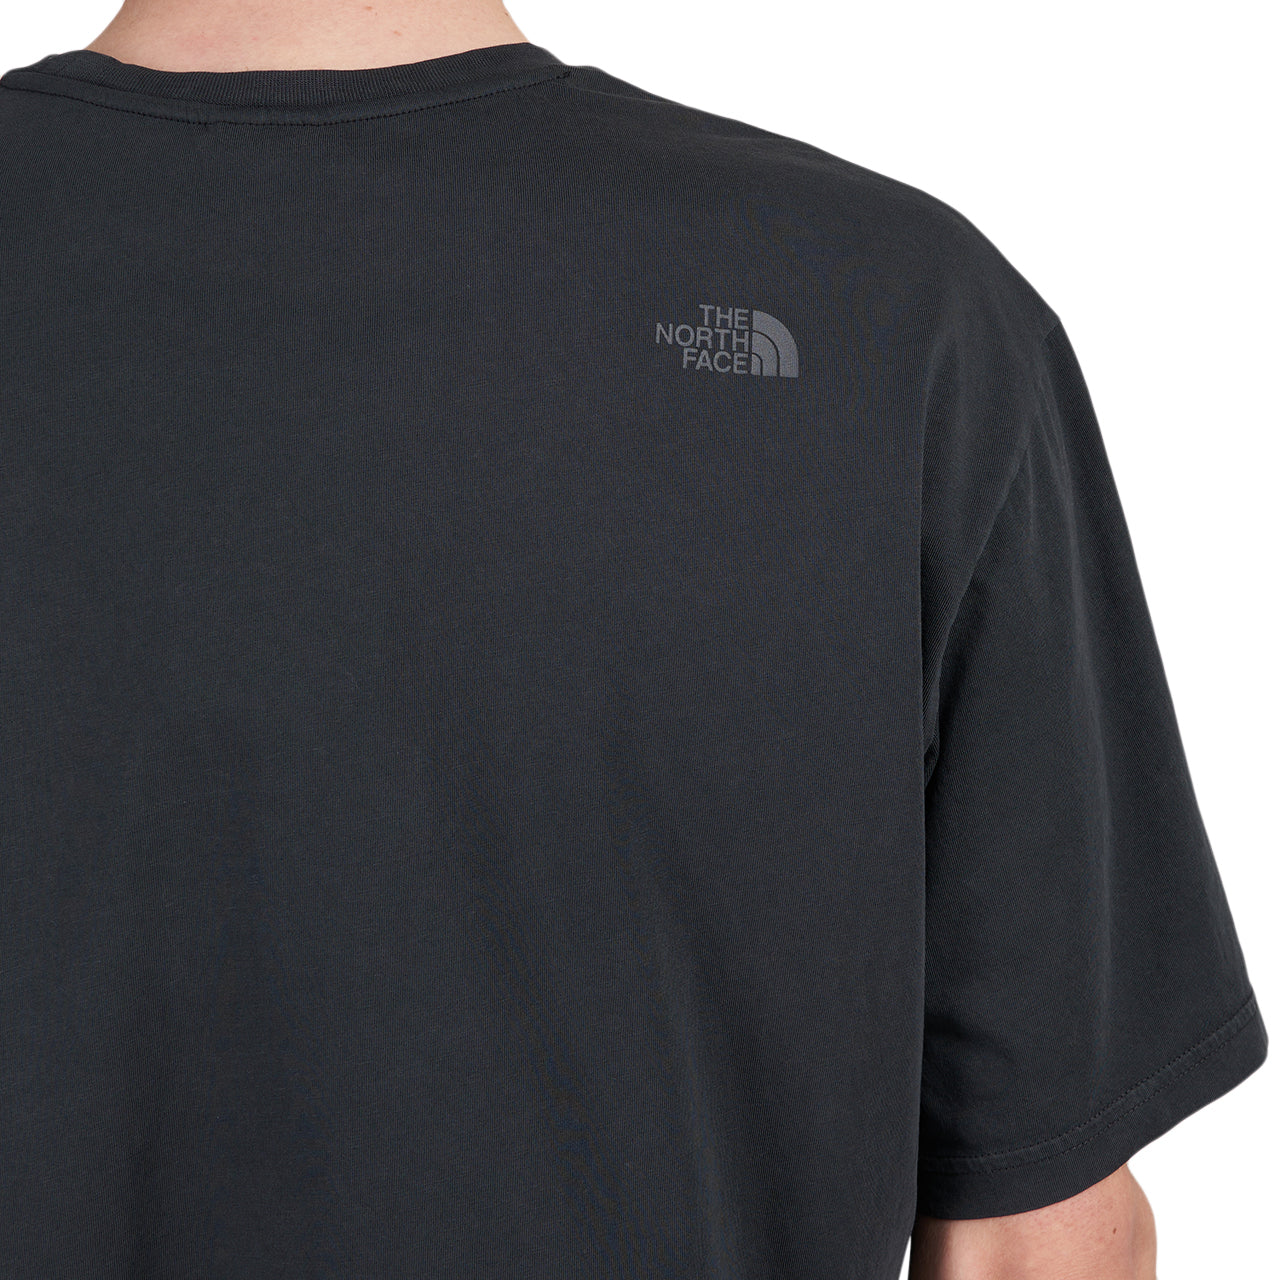 The North Face Heritage NF0A826QJK31 Dye - Store (Black) Allike T-Shirt